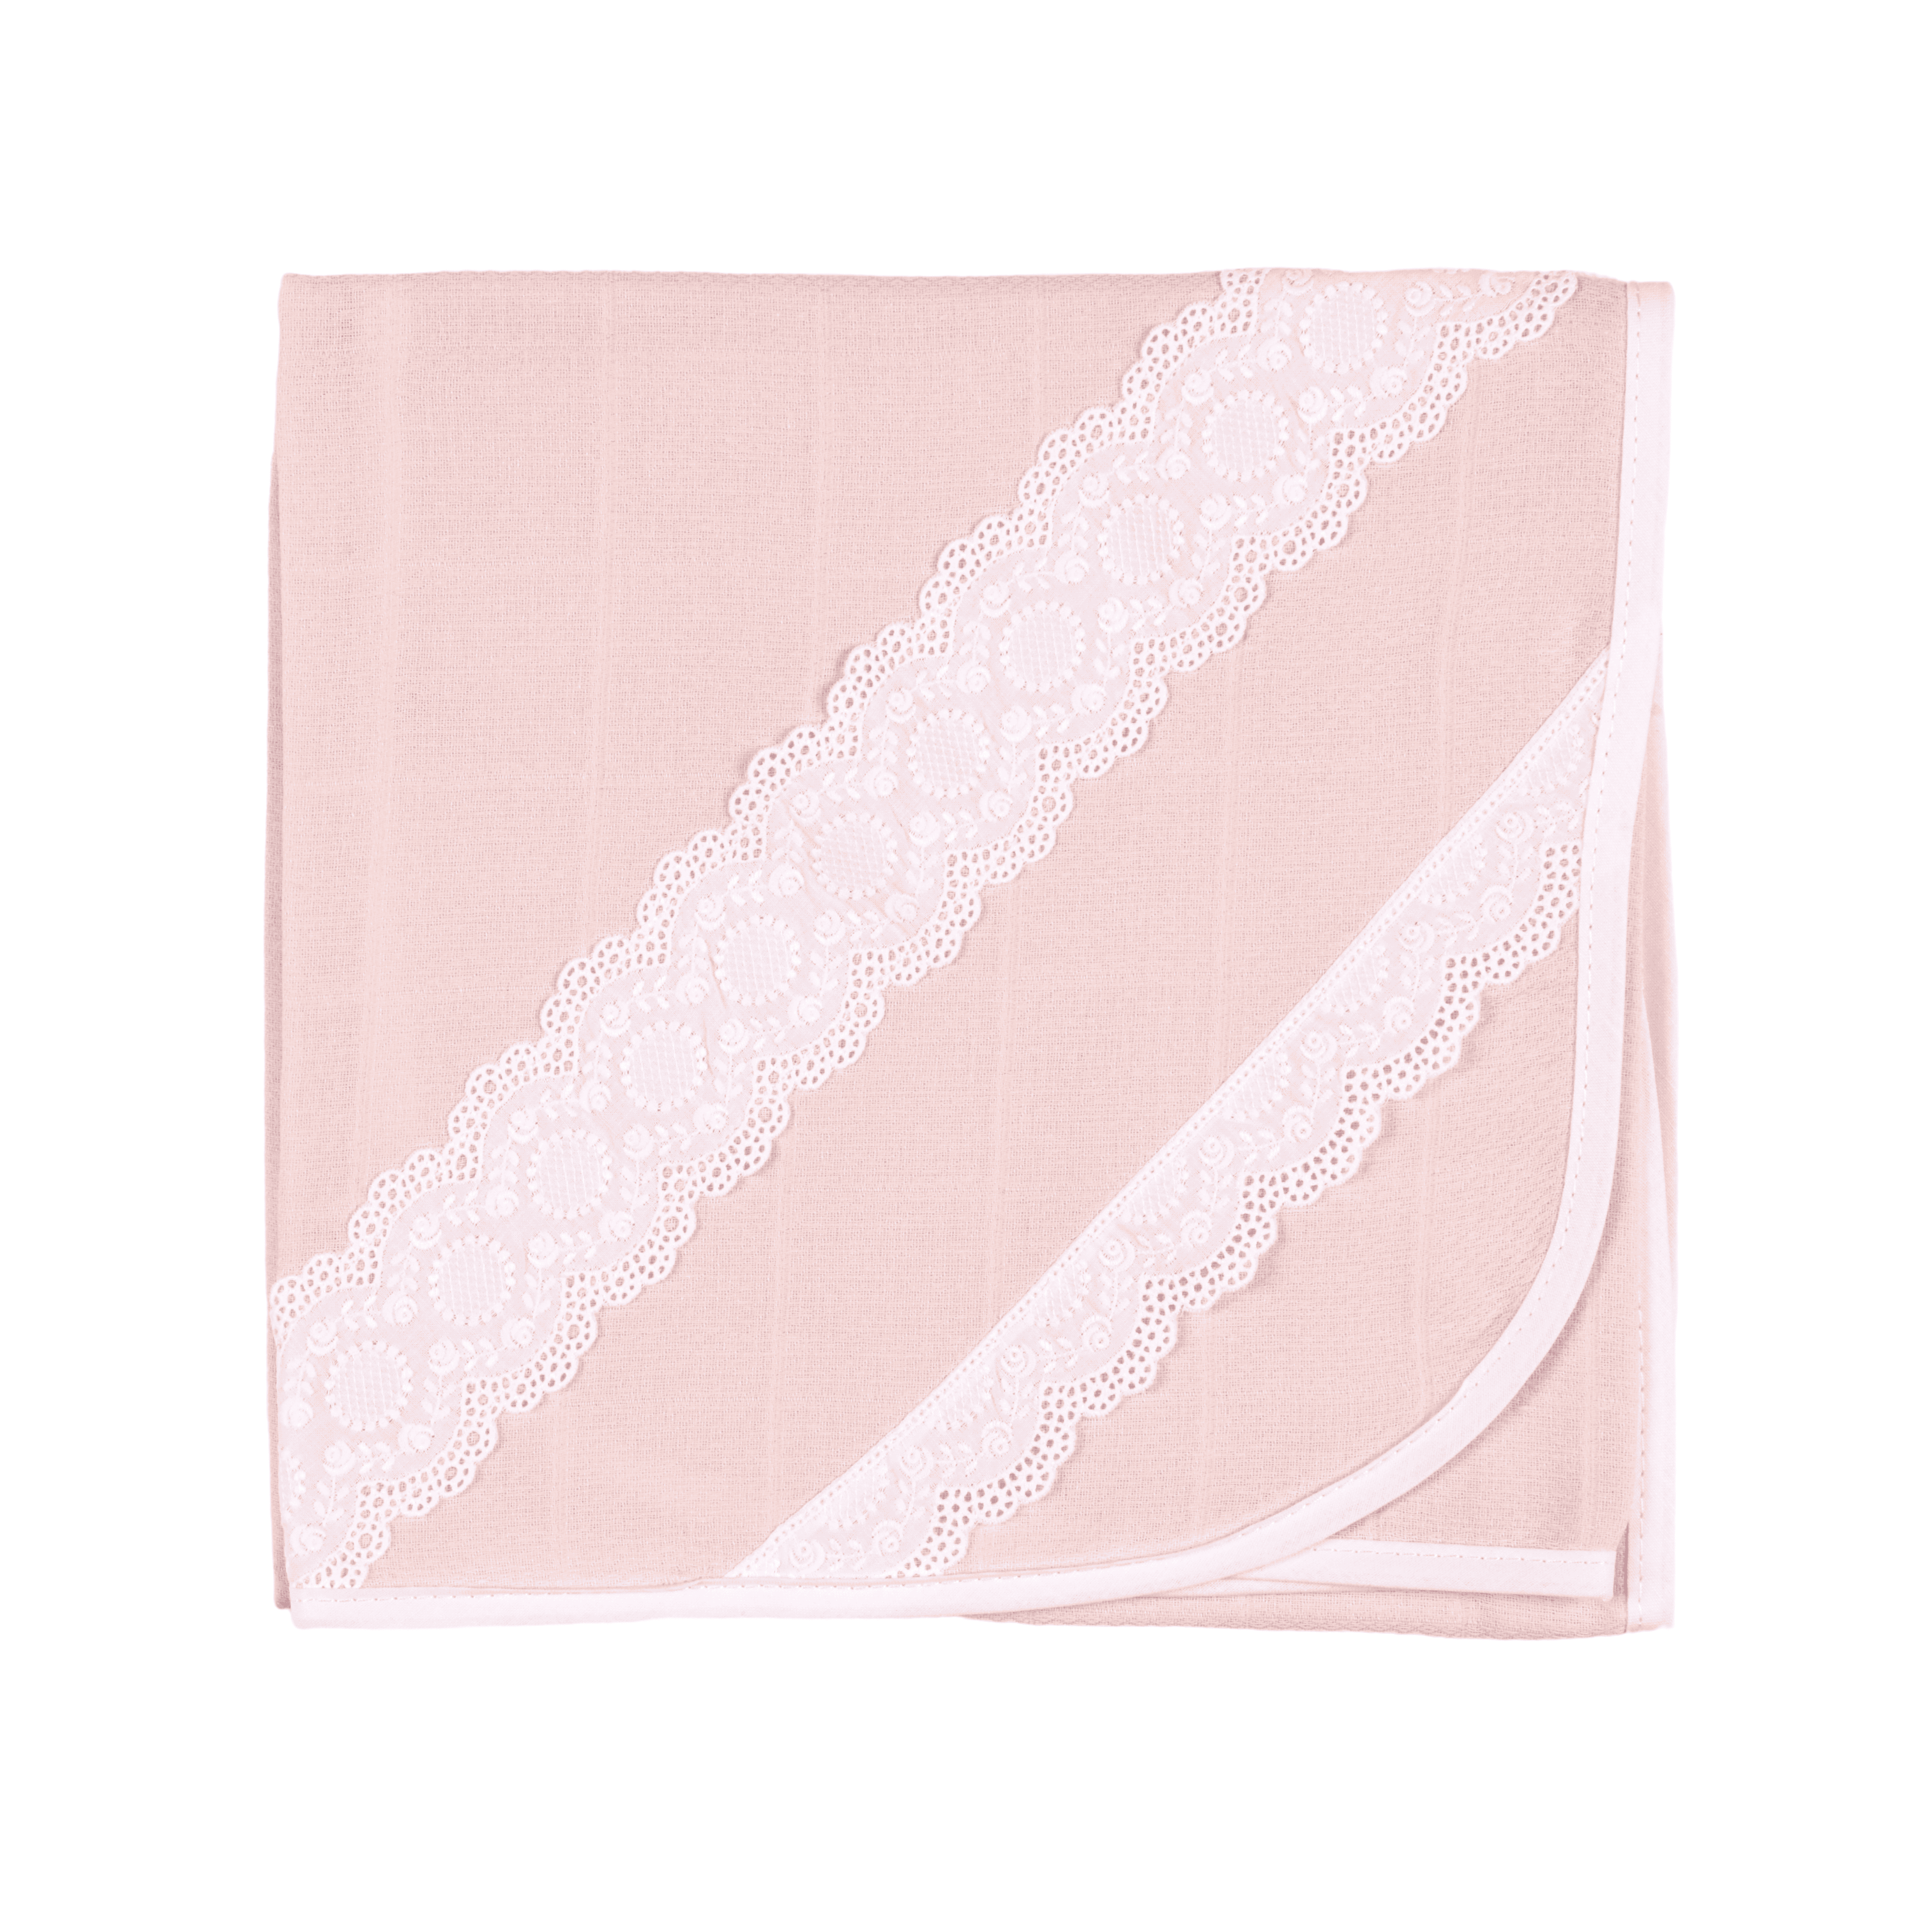 Chely | Girls Light Pink Cotton Muslin Square